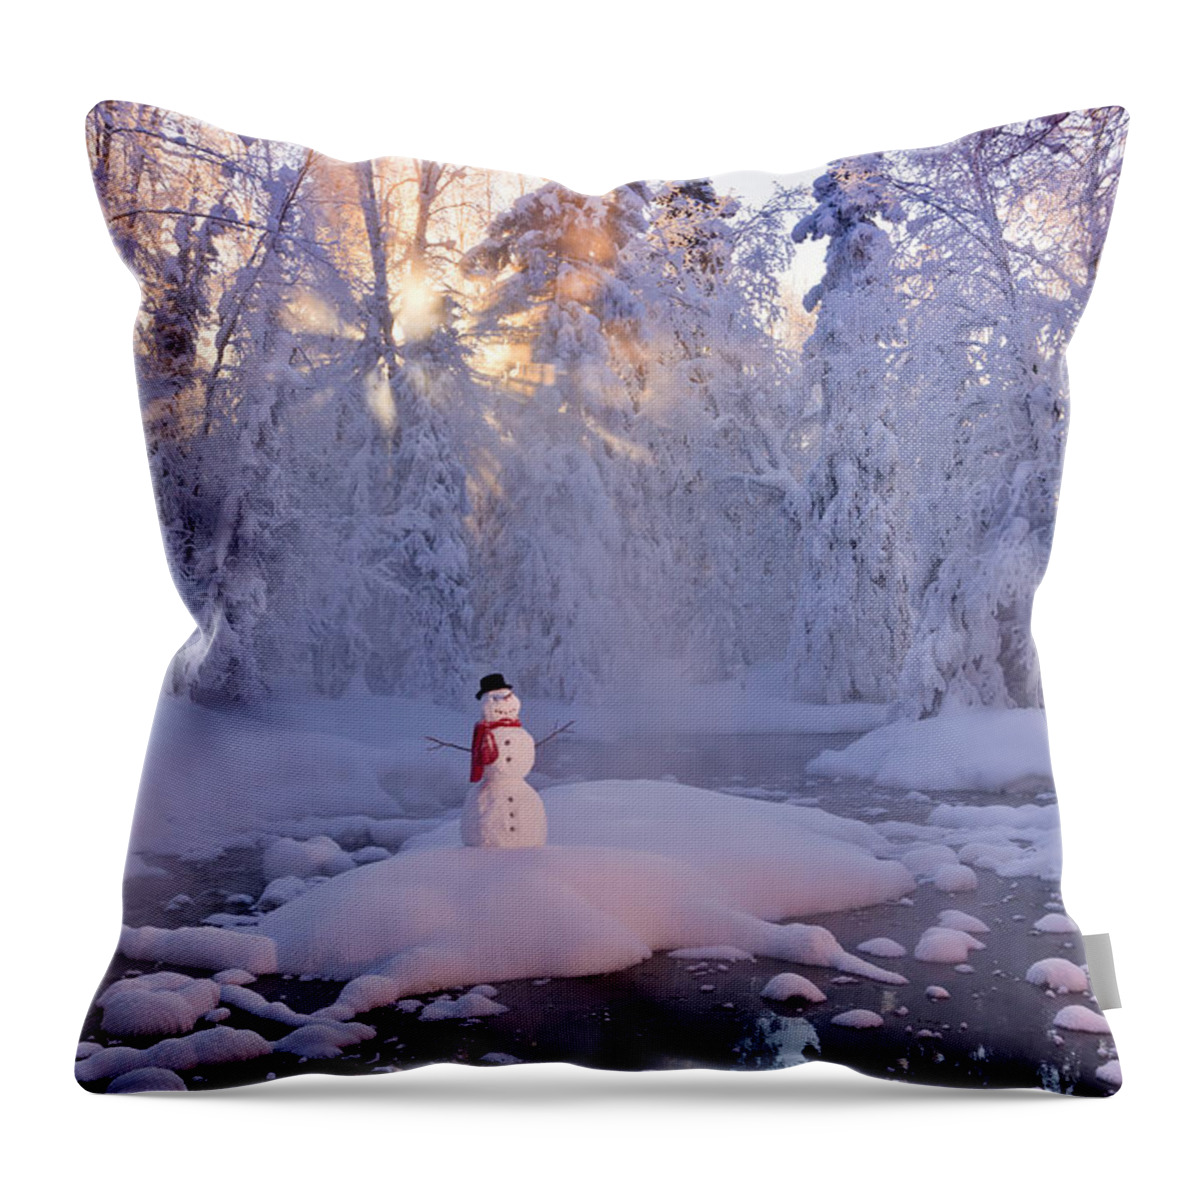 Smith Throw Pillow featuring the photograph Snowman Standing On A Small Island by Kevin Smith